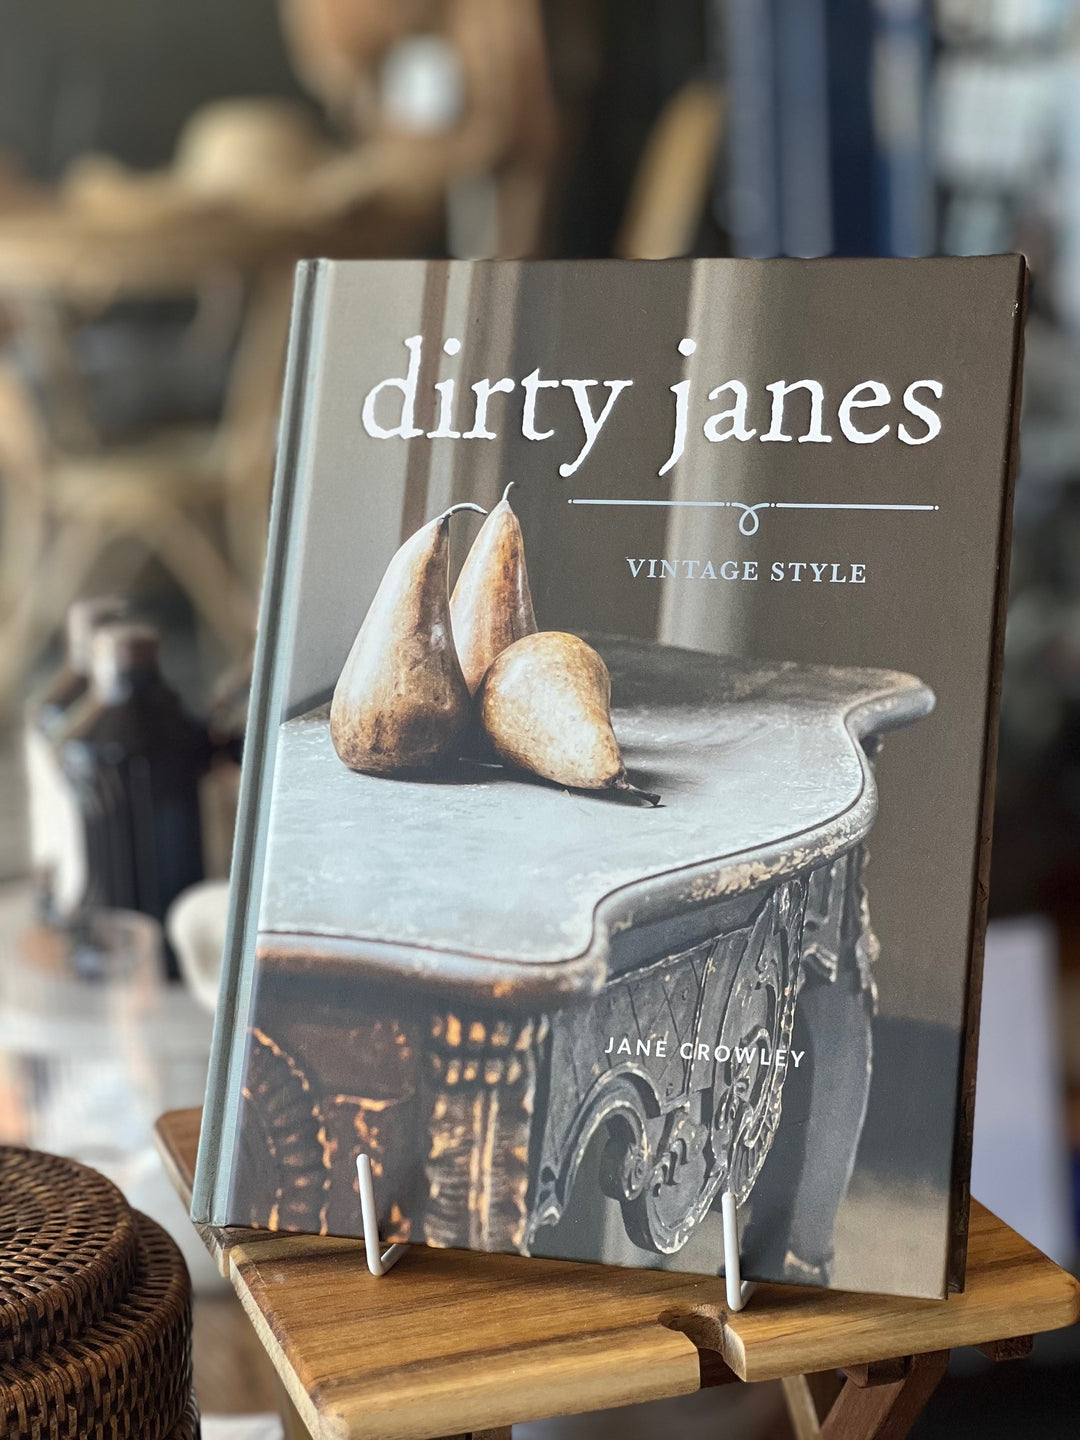 BOOK - Dirty Janes Vintage Style